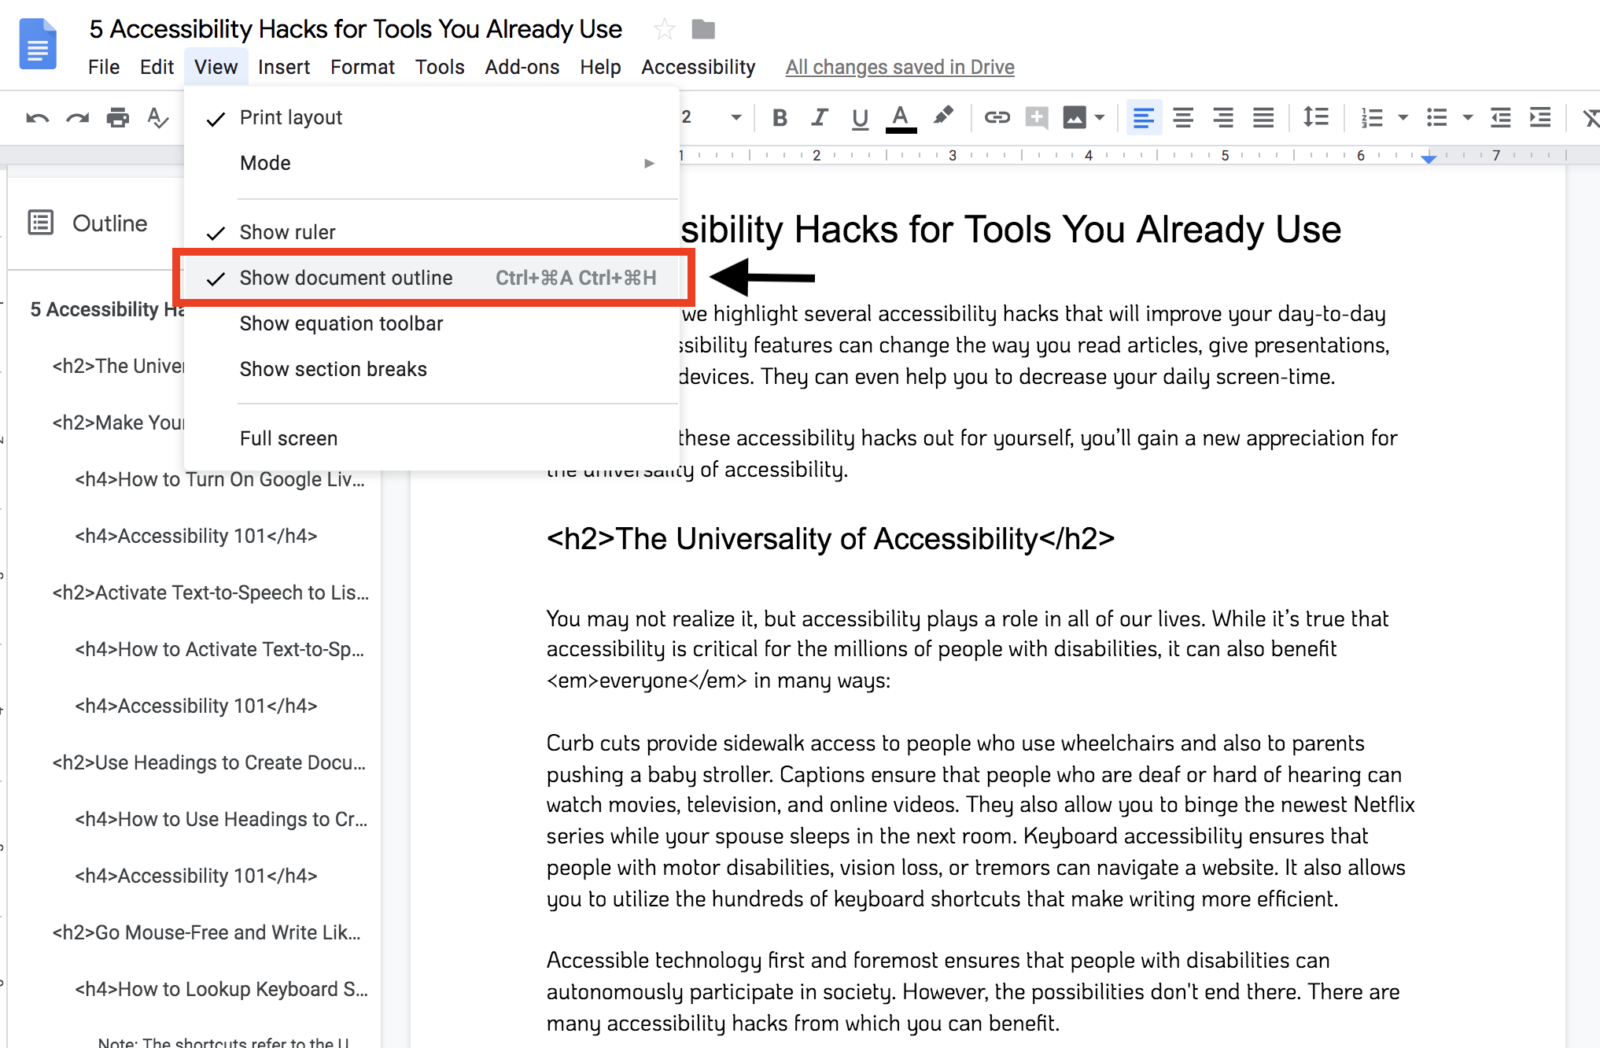 How to turn on outline view in Google Docs